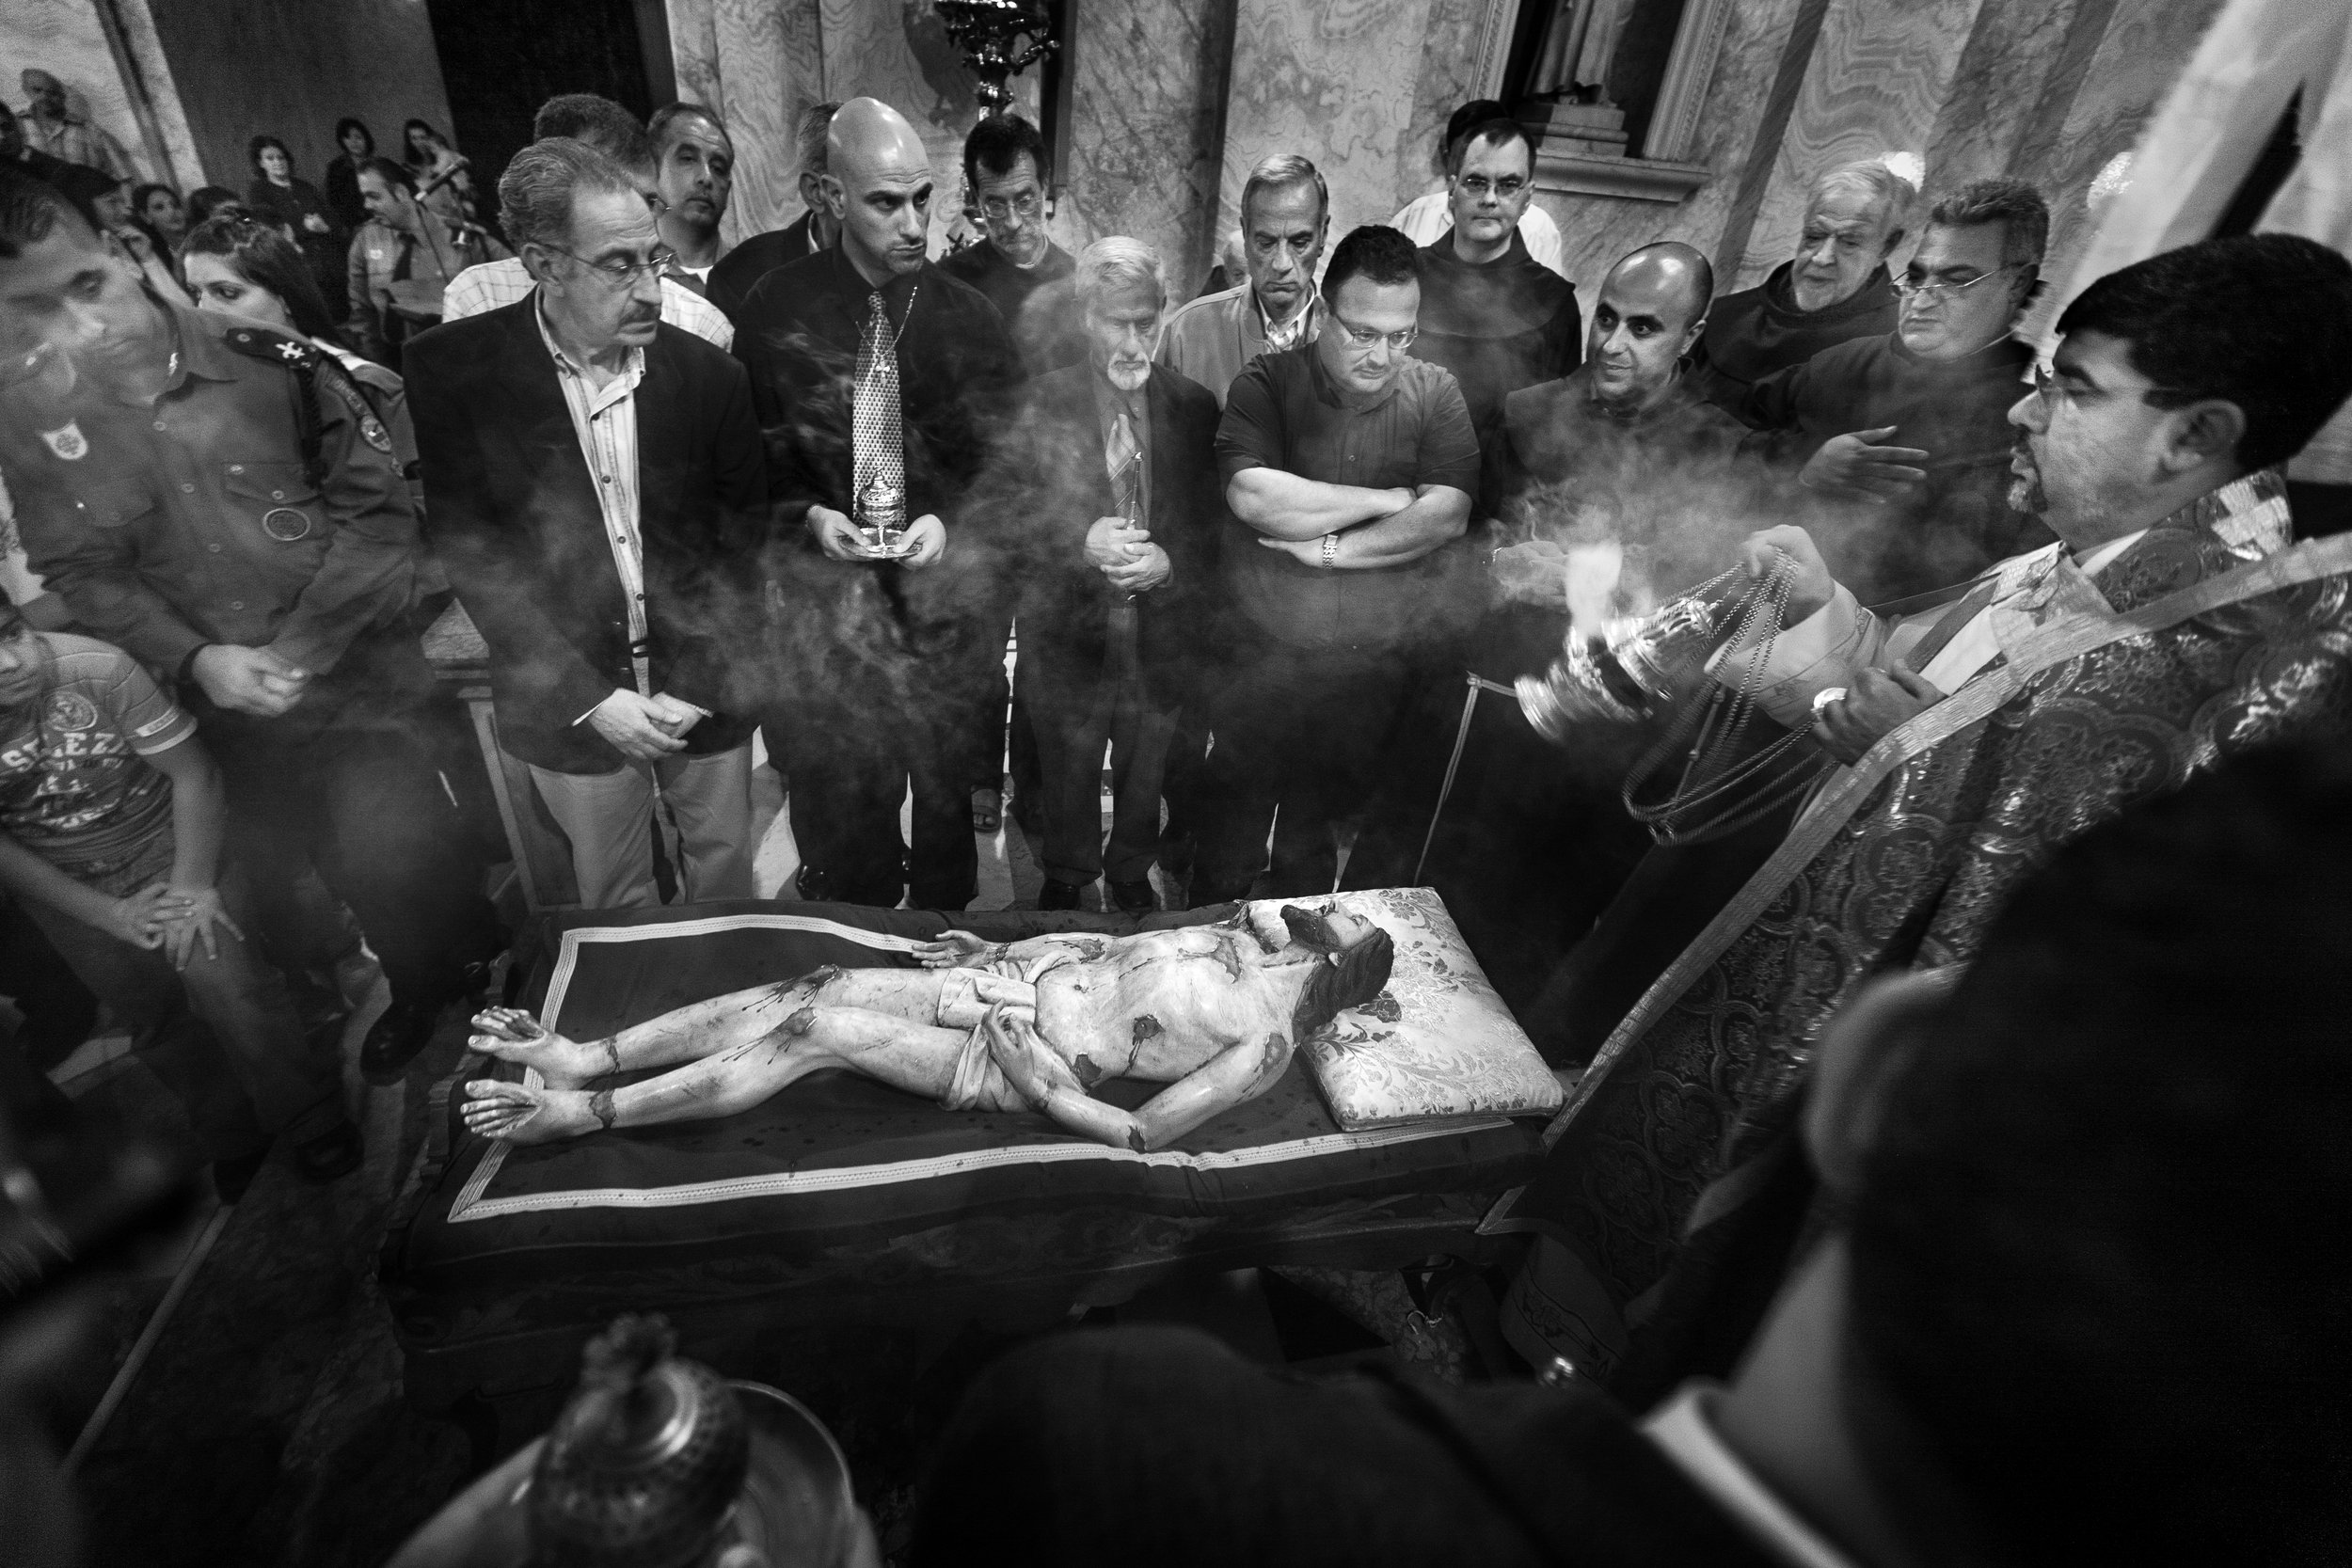  Worshippers touch the body of Christ during the funeral procession as part of their Easter mass at the Saviors Catholic Church in the Old City of Jerusalem. 